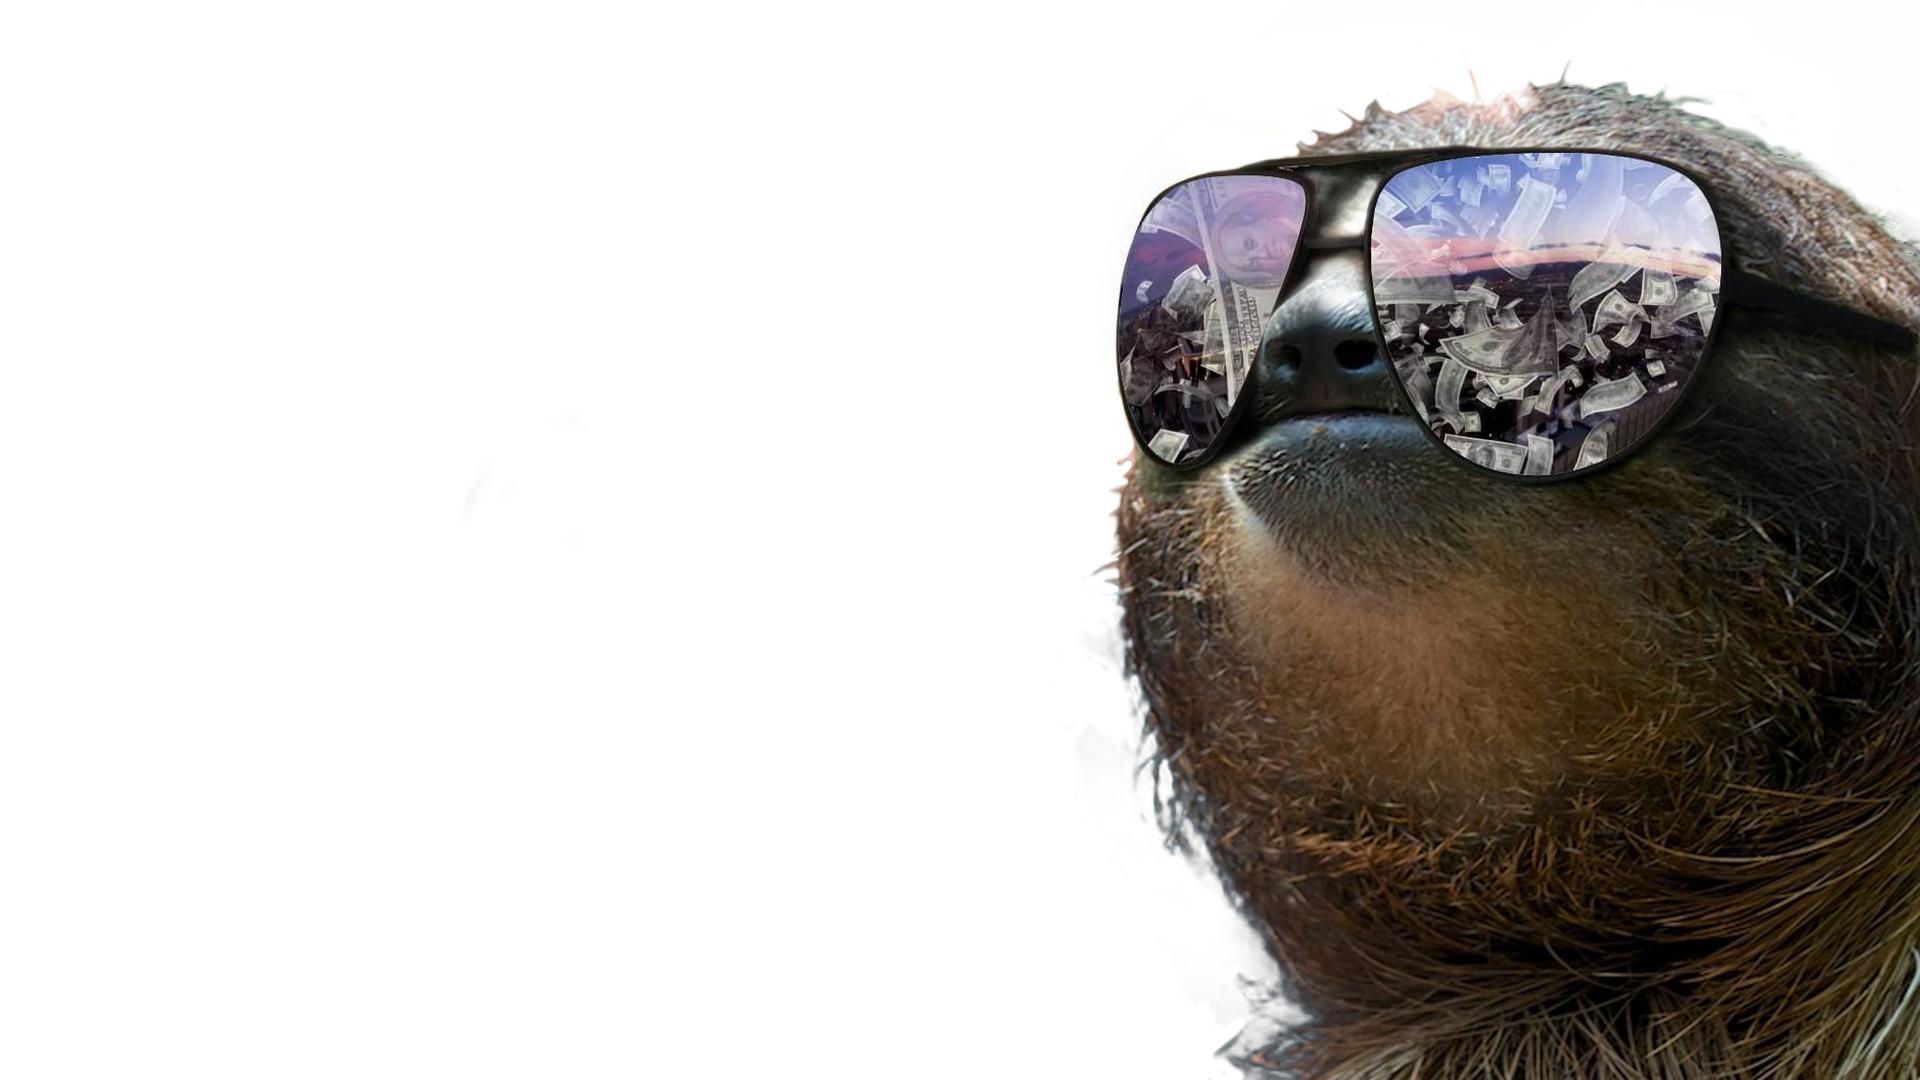 Sloth Wallpaper A Very Slothy Wallpaper Xpost From